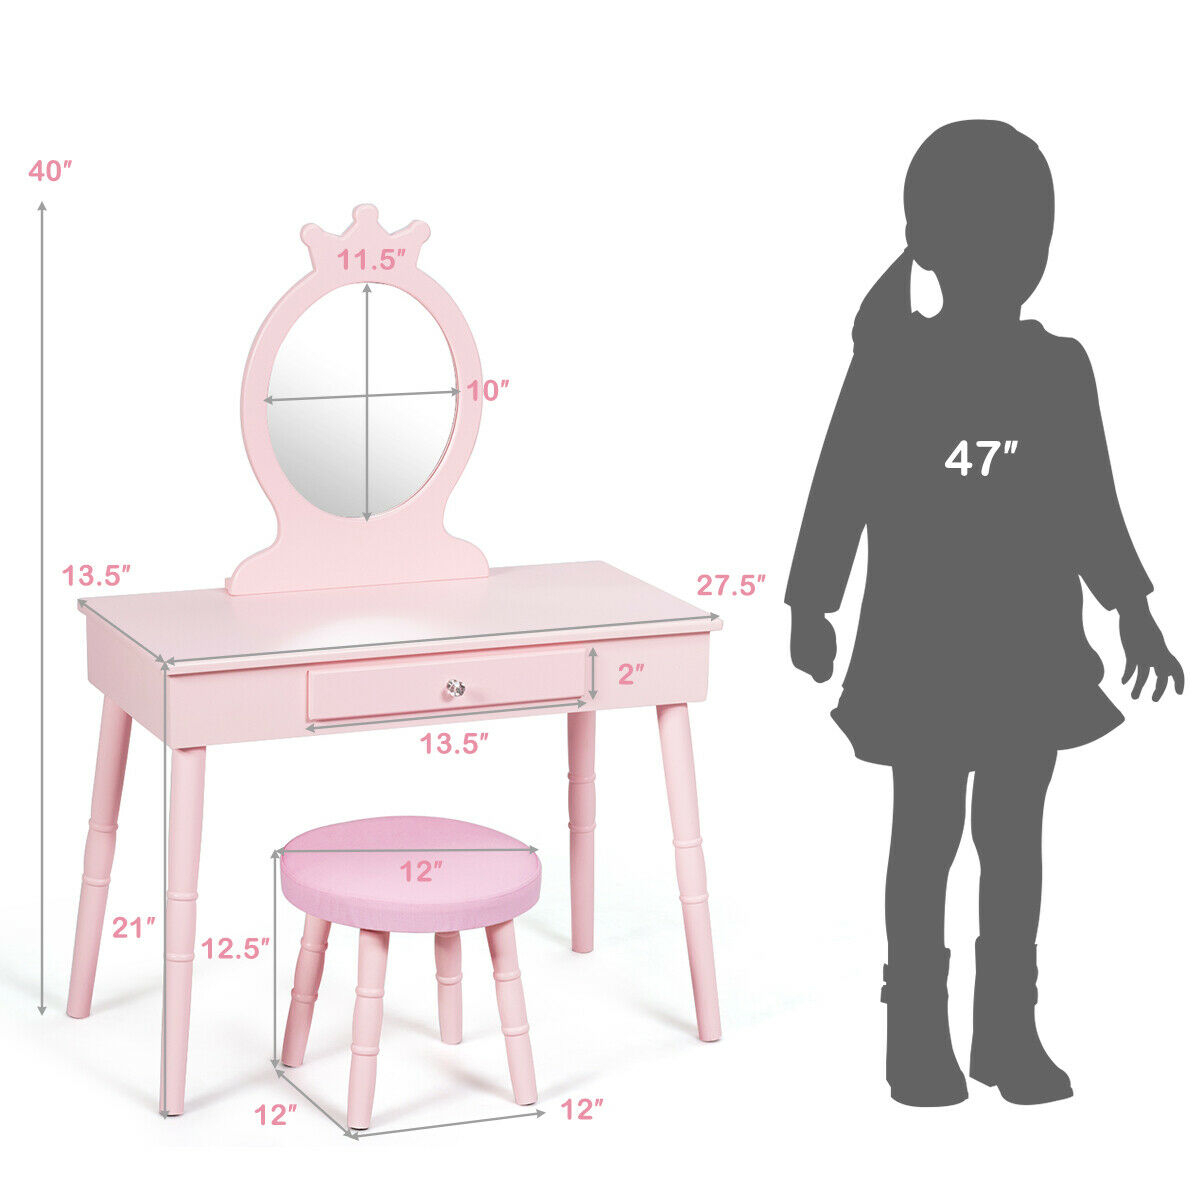 Kids Vanity Makeup Table & Chair Set Make Up Stool Play Set For Children Pink